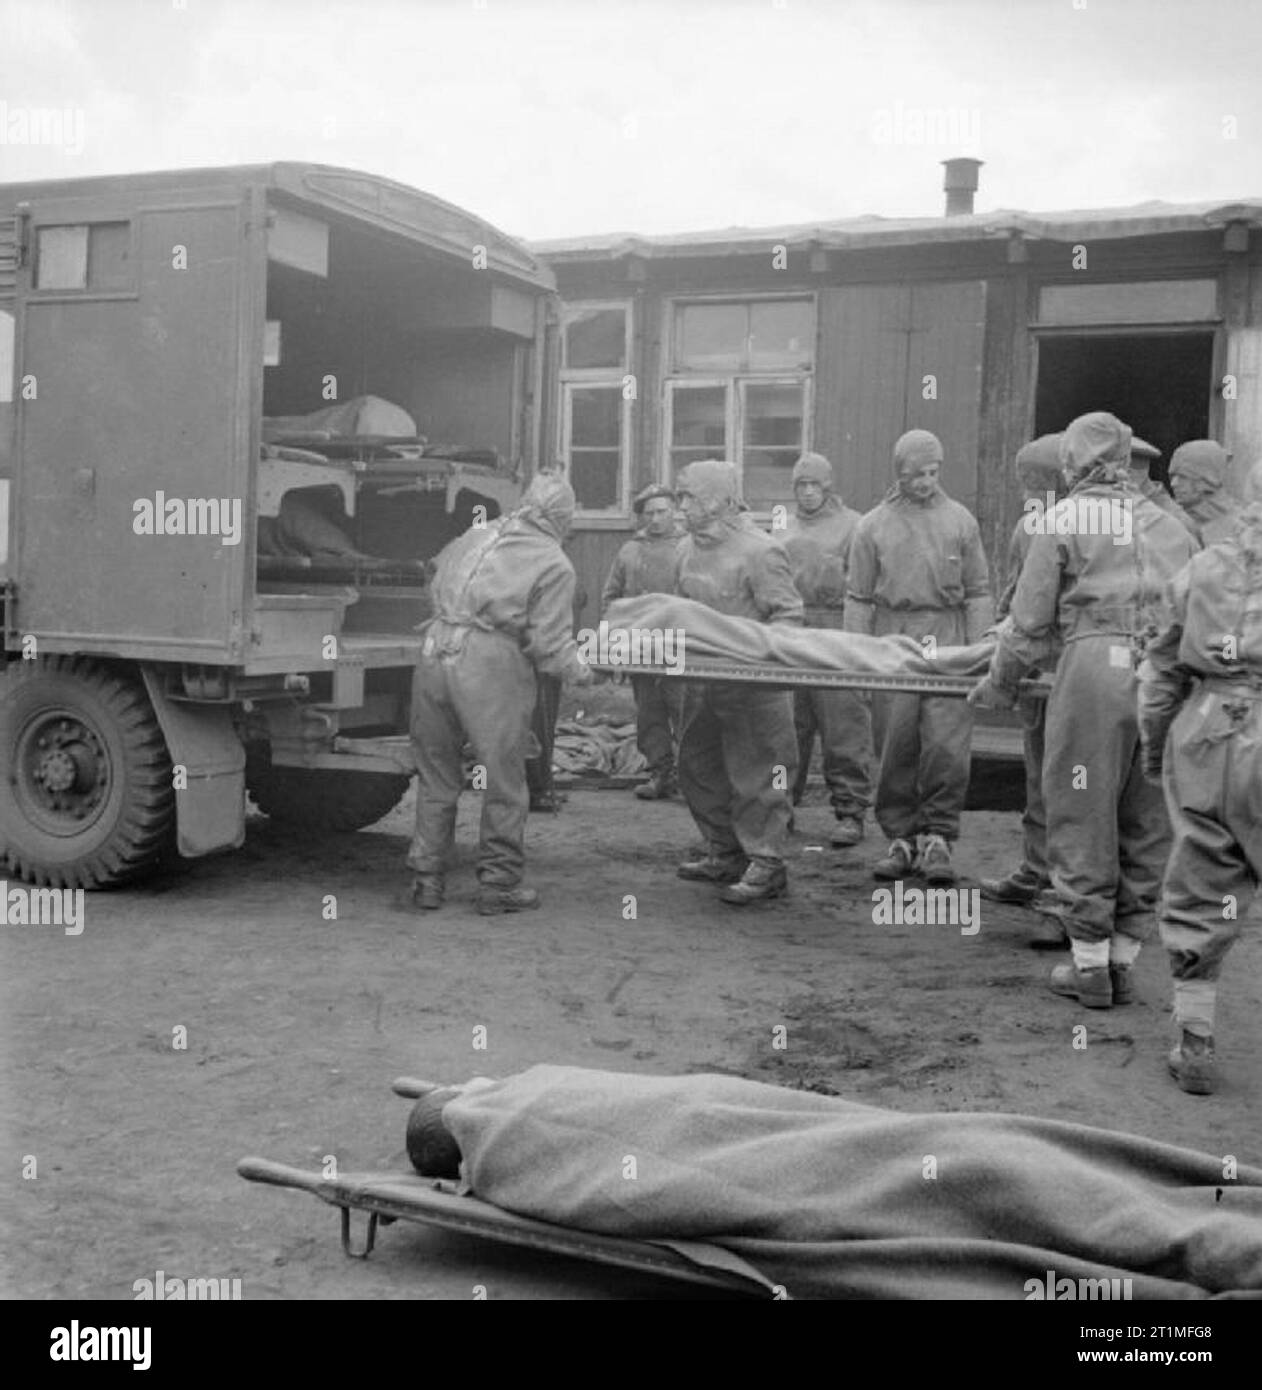 The Liberation of Bergen-belsen Concentration Camp, May 1945 Men of 11 Light Field Ambulance, Royal Army Medical Corps, wearing protective clothing, evacuate an inmate suffering from typhus from Camp No 1. By 2 May 1945, 6,500 of the sick had been evacuated to hospital. Stock Photo